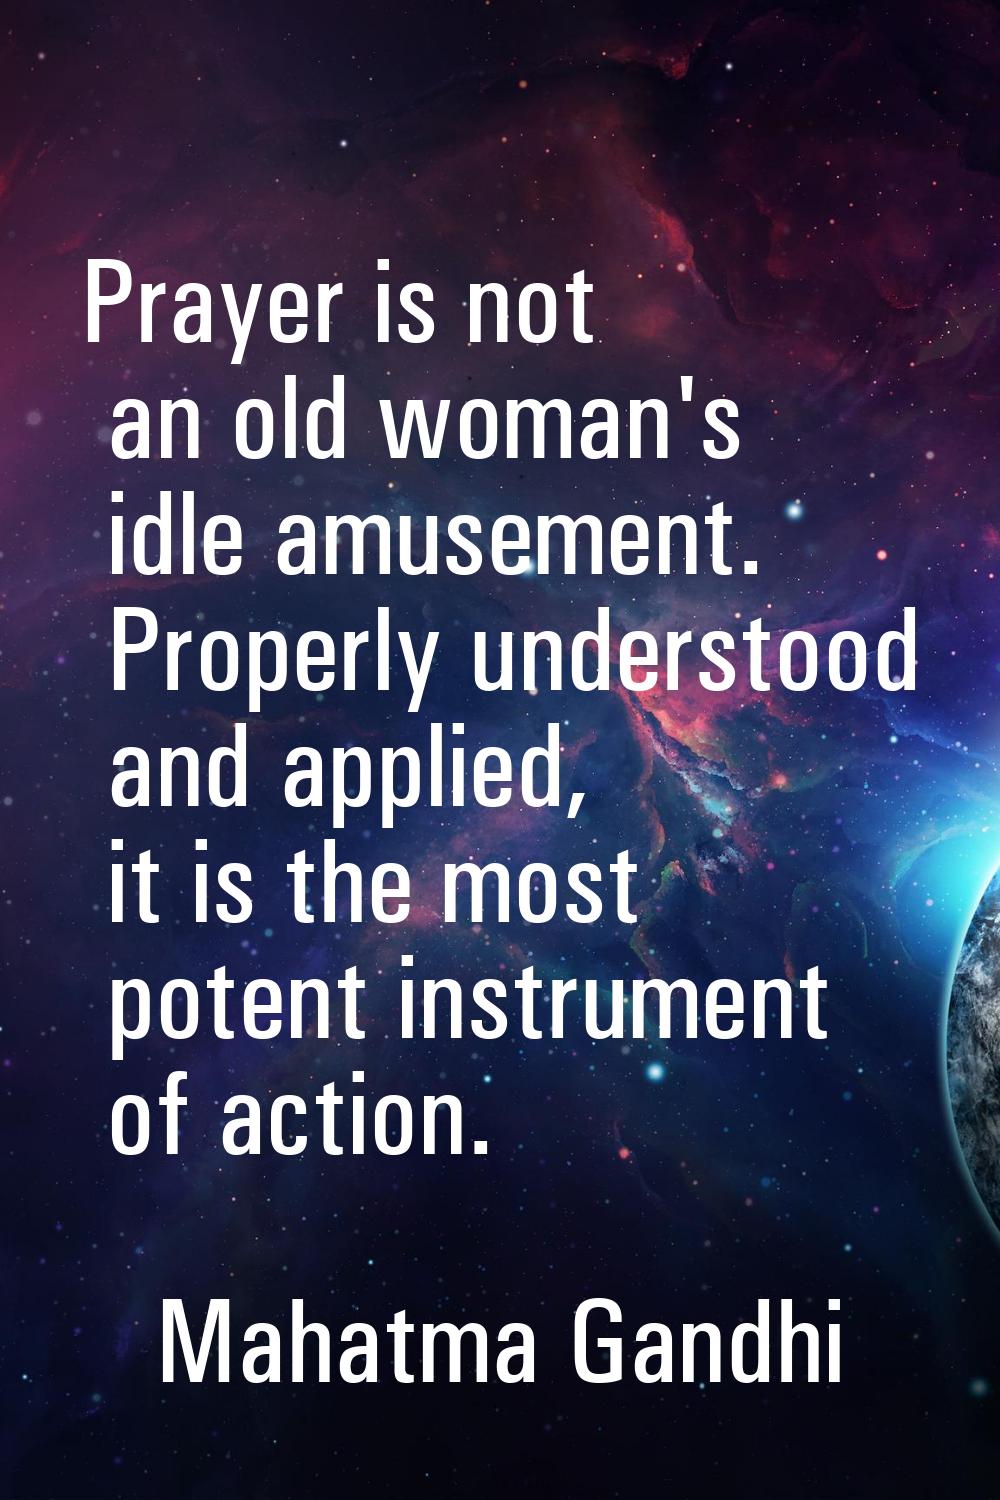 Prayer is not an old woman's idle amusement. Properly understood and applied, it is the most potent